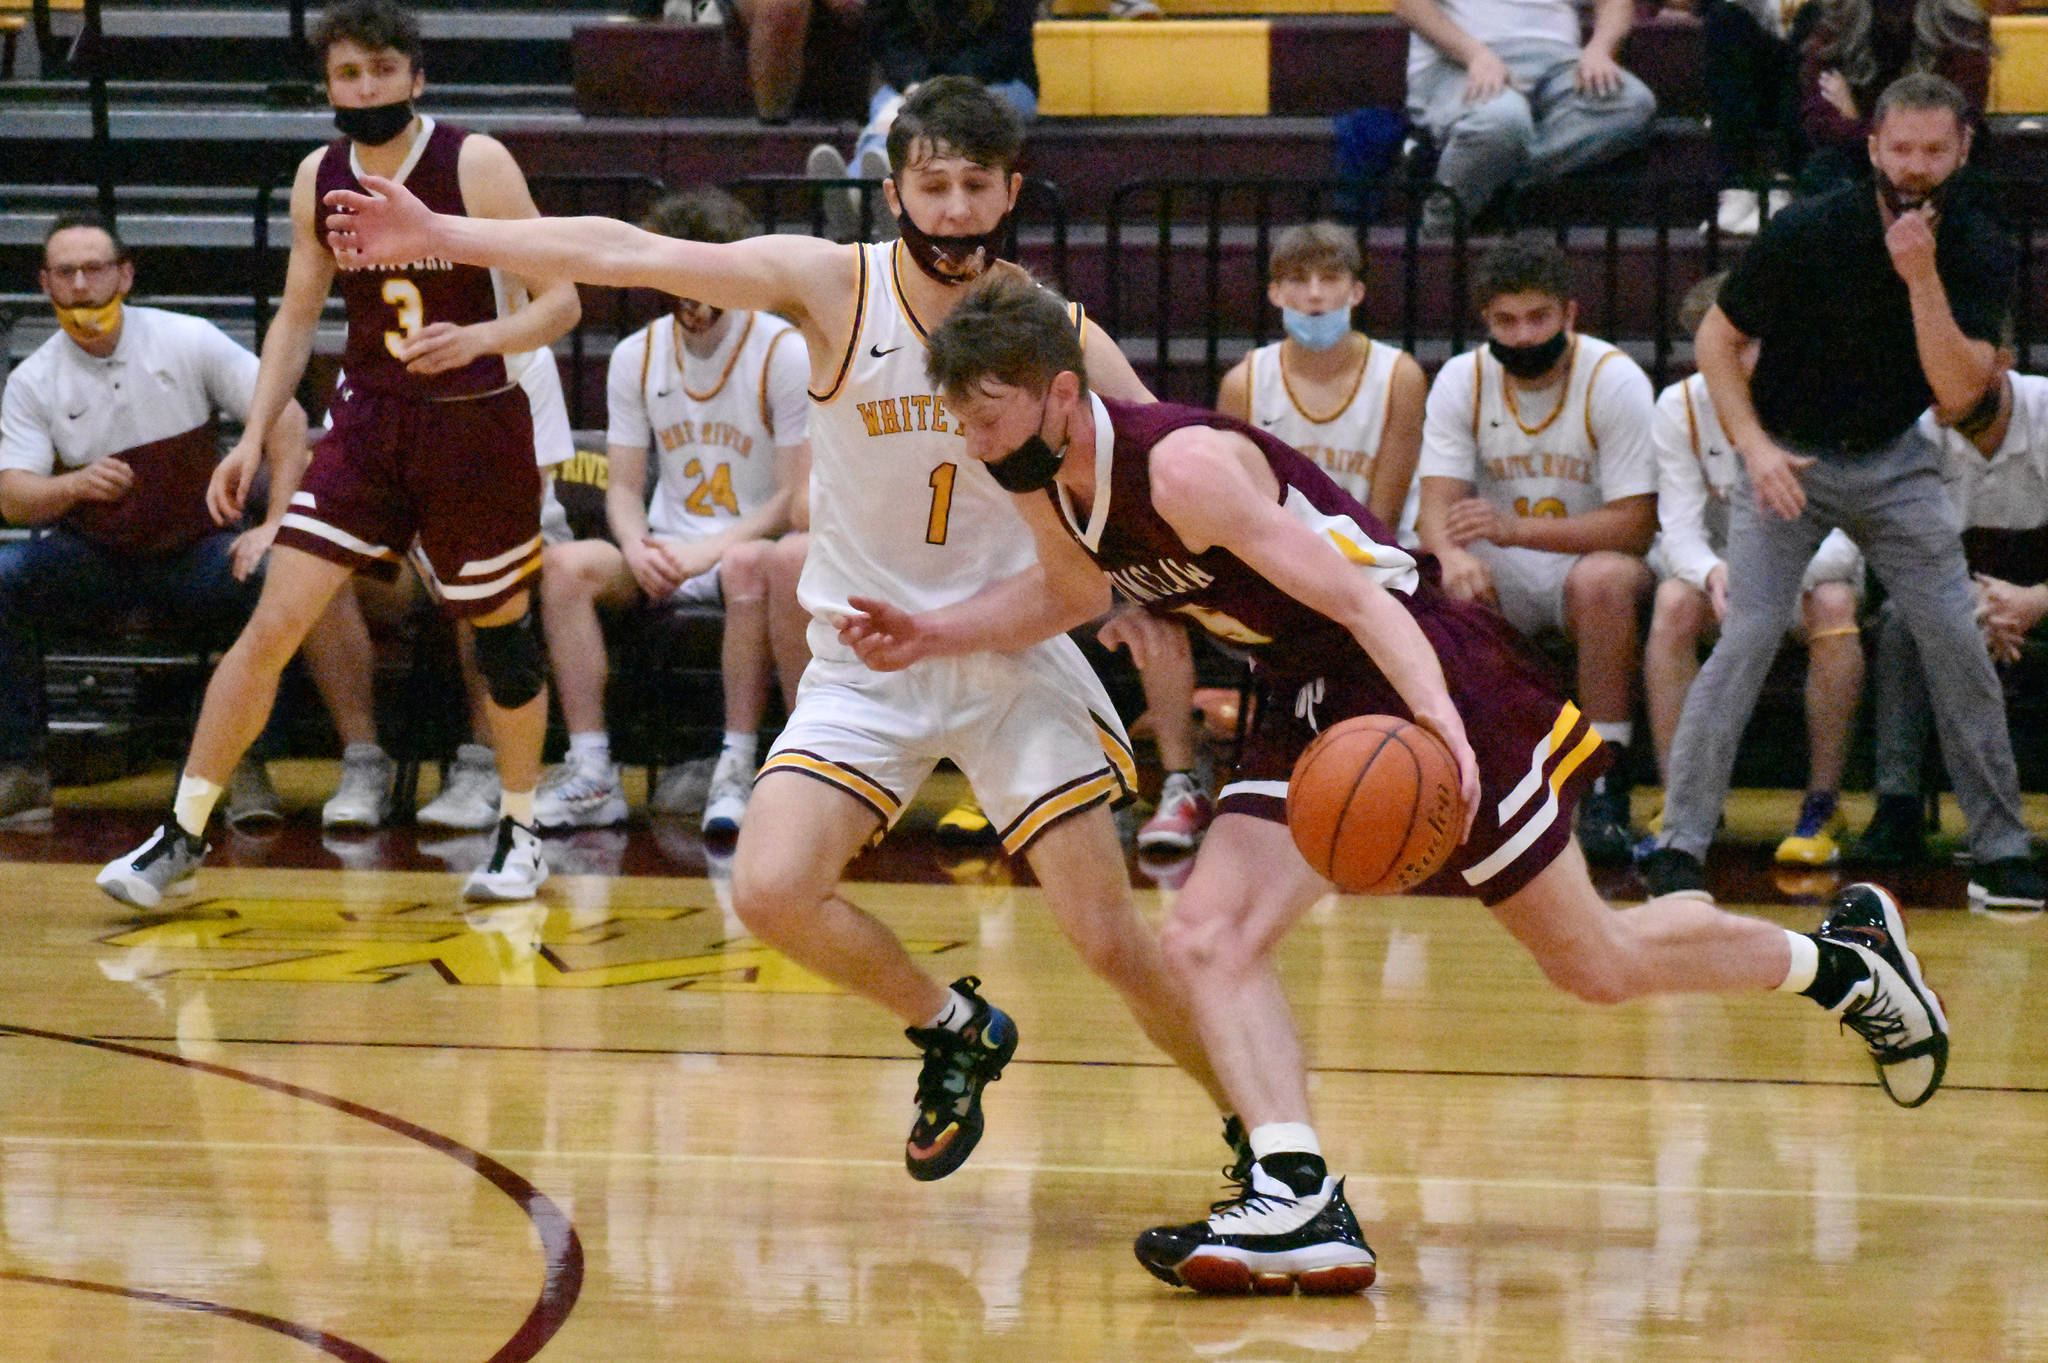 PHOTOS BY KEVIN HANSON Boys’ basketball teams from White River and Enumclaw battled in the opening round of the SPSL 2A tournament, with the winner advancing to the tourney championship the following night. Playing on their home floor, the White River crew emerged victorious. At left, Wyatt Glissmeyer (3) heads upcourt, trailed by Enumclaw’s Carson Firnkoess (11). At right, Enumclaw’s John Leonard looks to get past the defense of White River’s Will Schroeder.